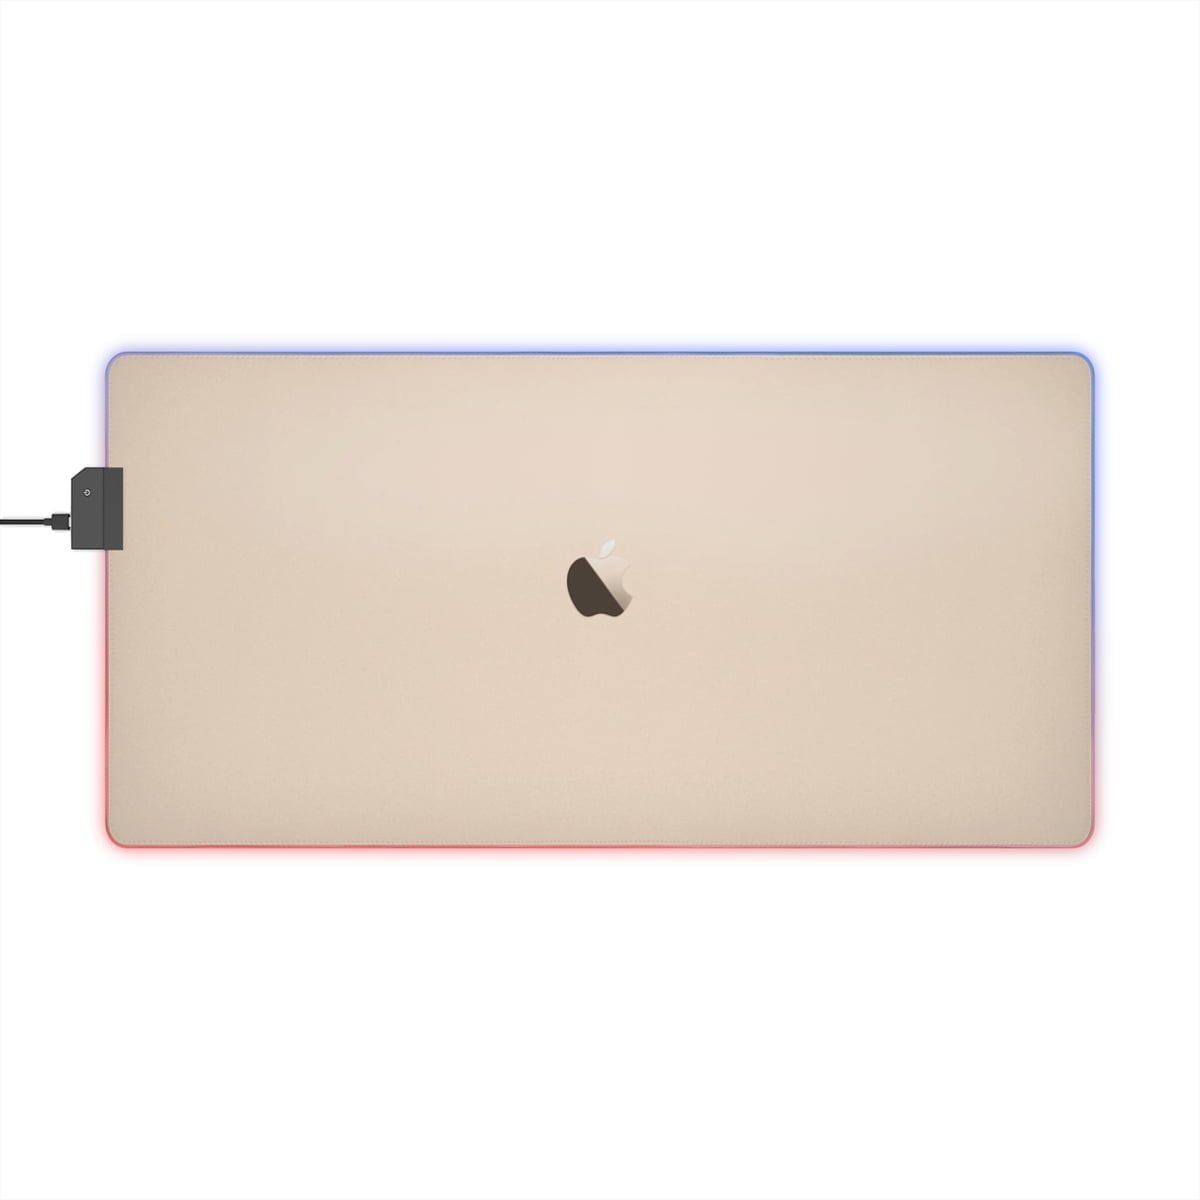 - Apple LED Desk Pad (Gold) - Gaming Mouse Pad with Apple Gold BG. - NoowAI Shop